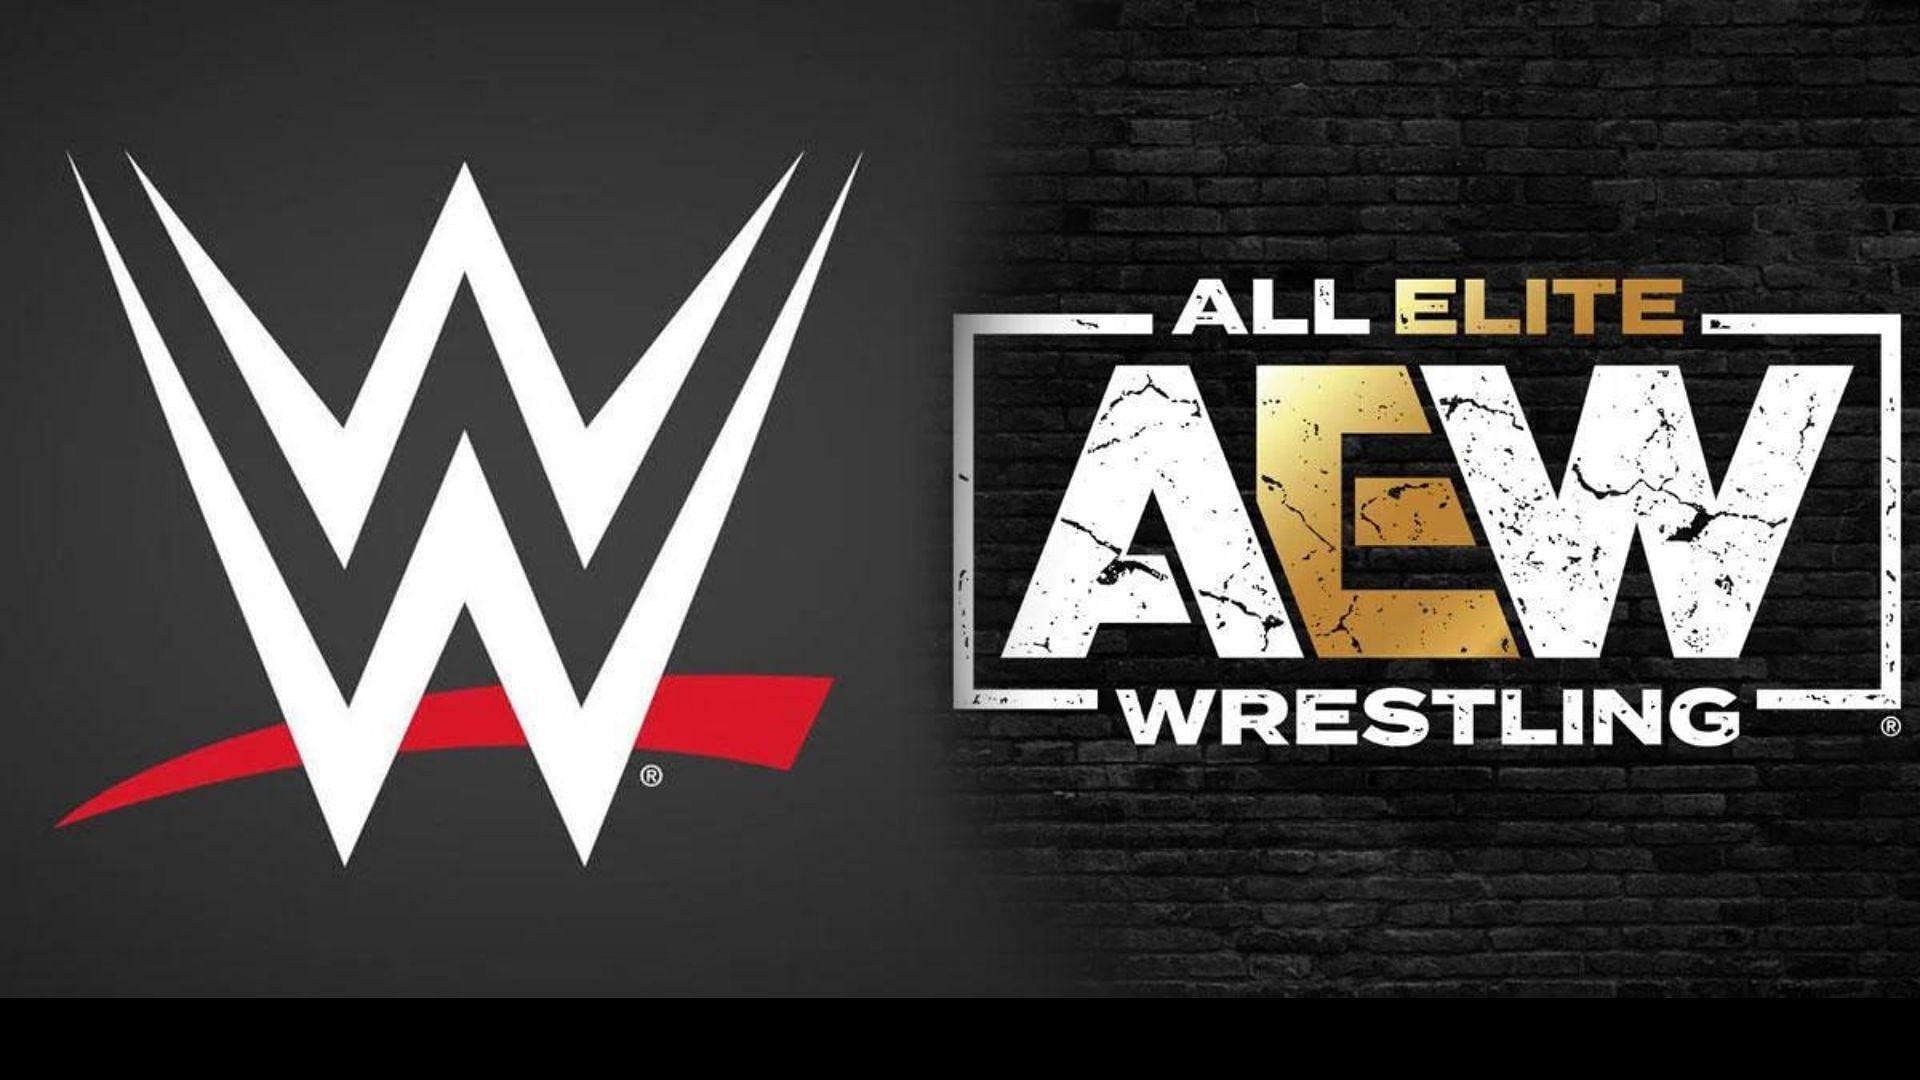 WWE and AEW are top players in the wrestling industry